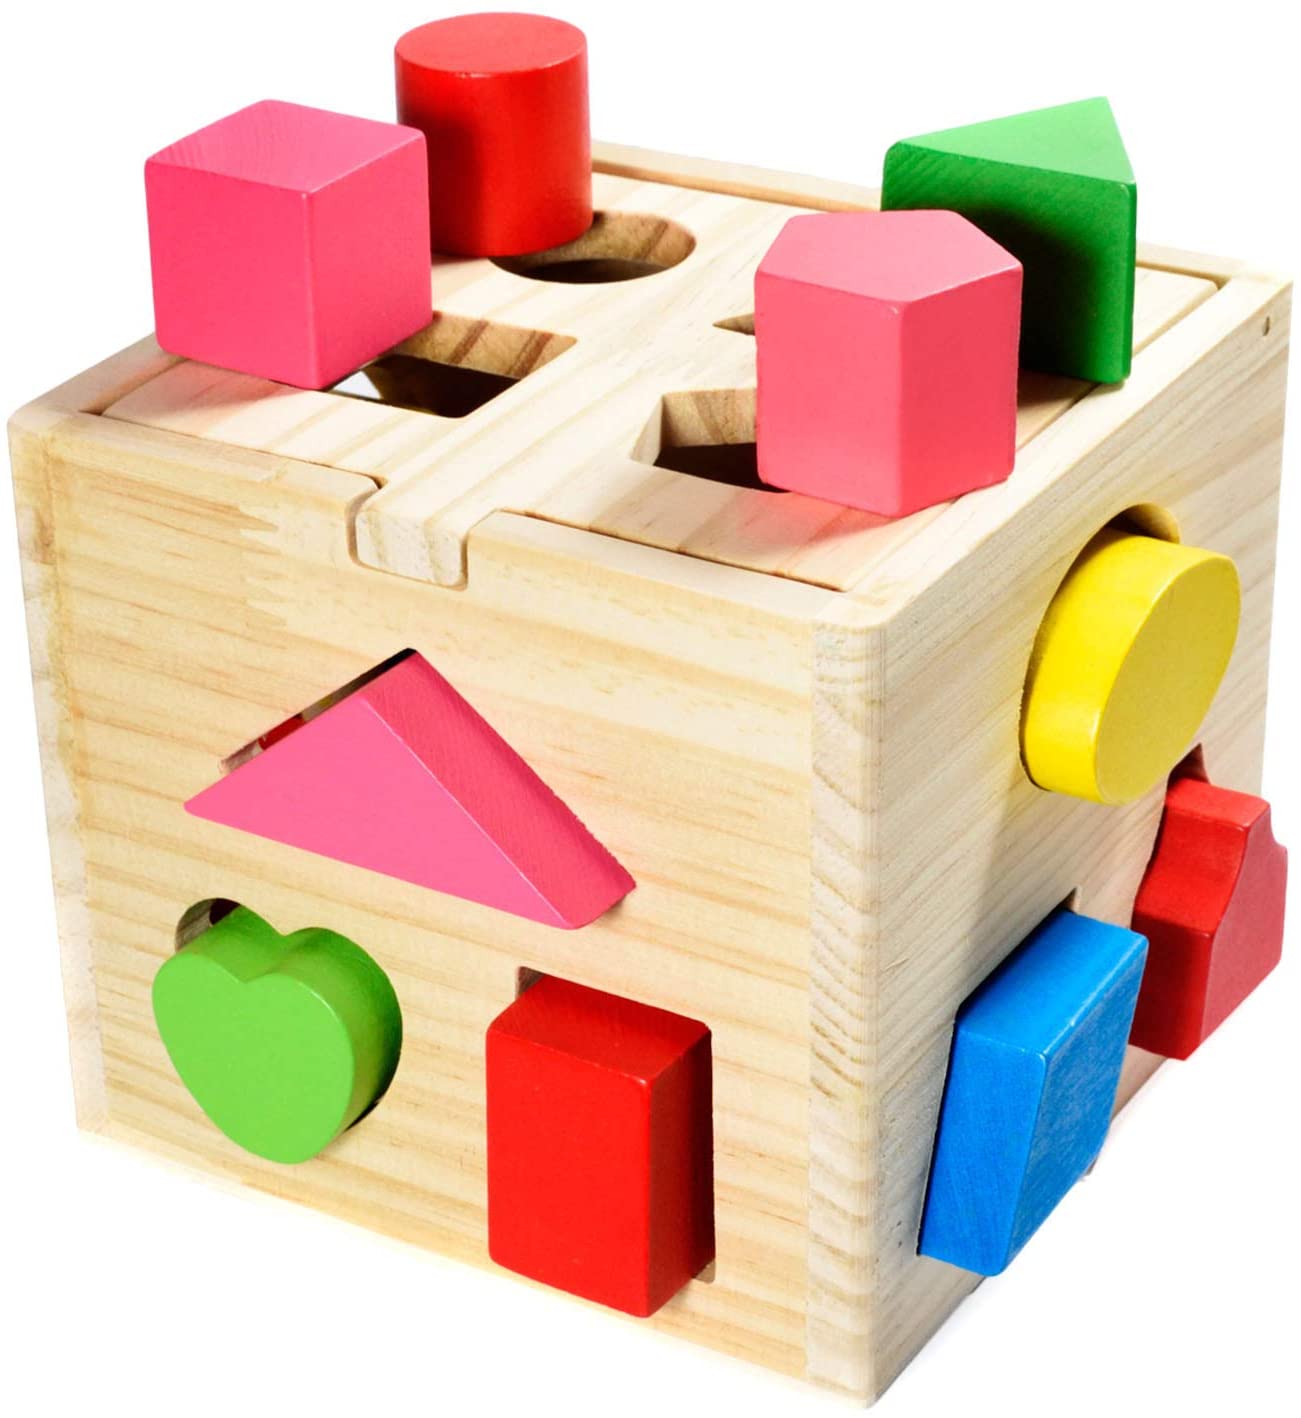 Wooden Cube Toy Cube Puzzle Plug-In Box for Baby & Toddler Wooden Toy Train Motor Skills Learning Toys to Promote Shape Recognition and Focus